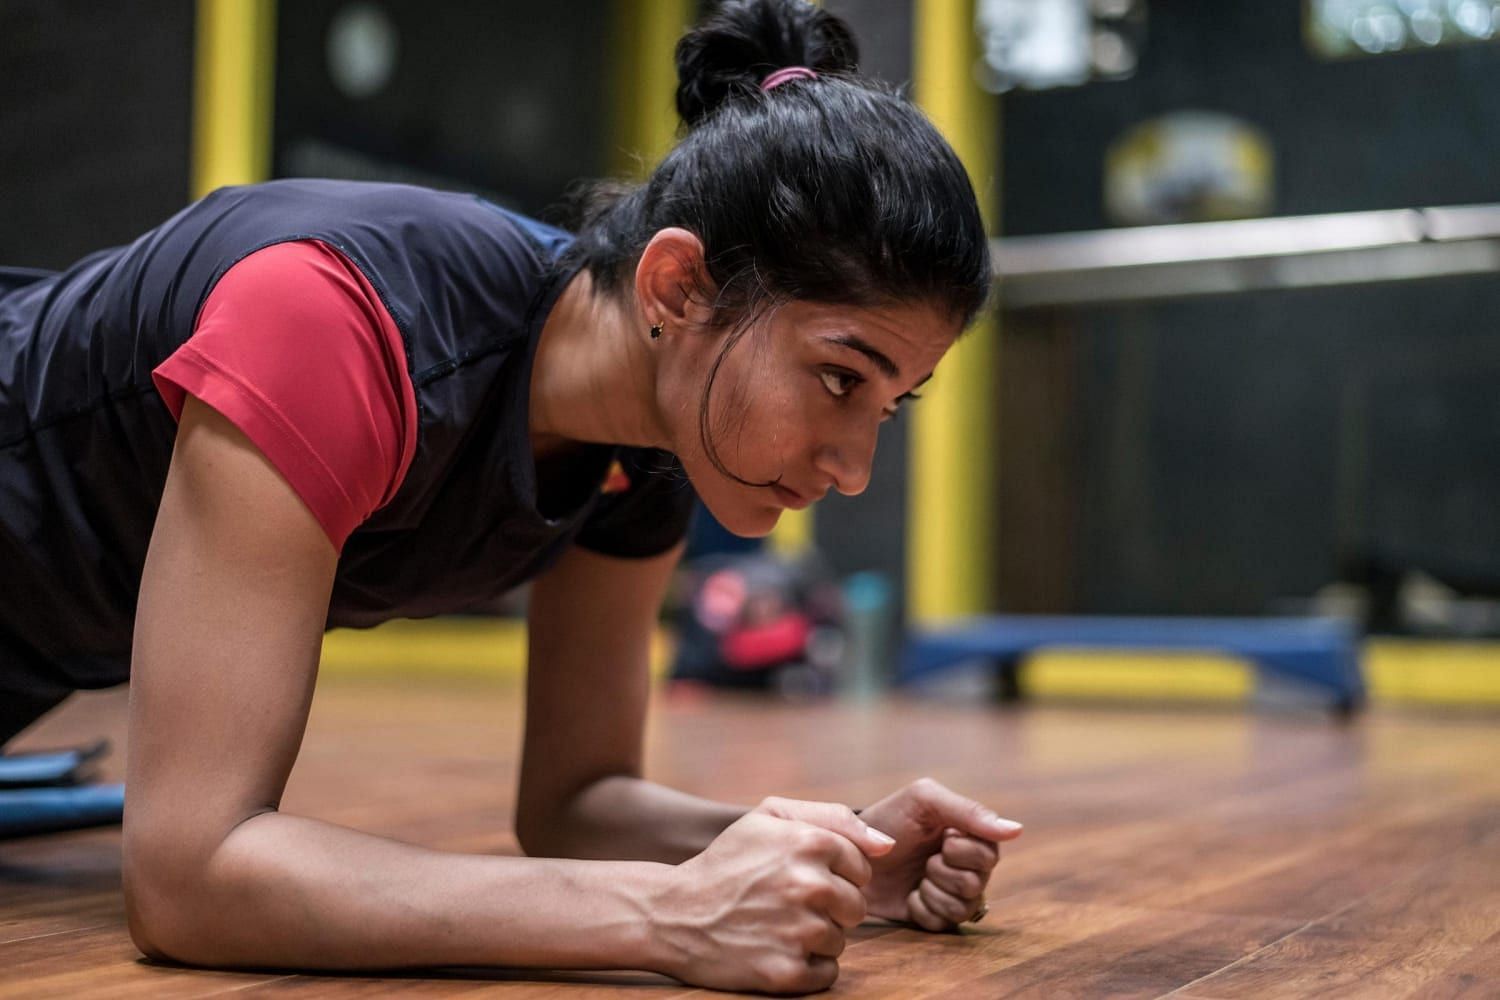 Ashwini during a training session at the gym (Image via Red bull)